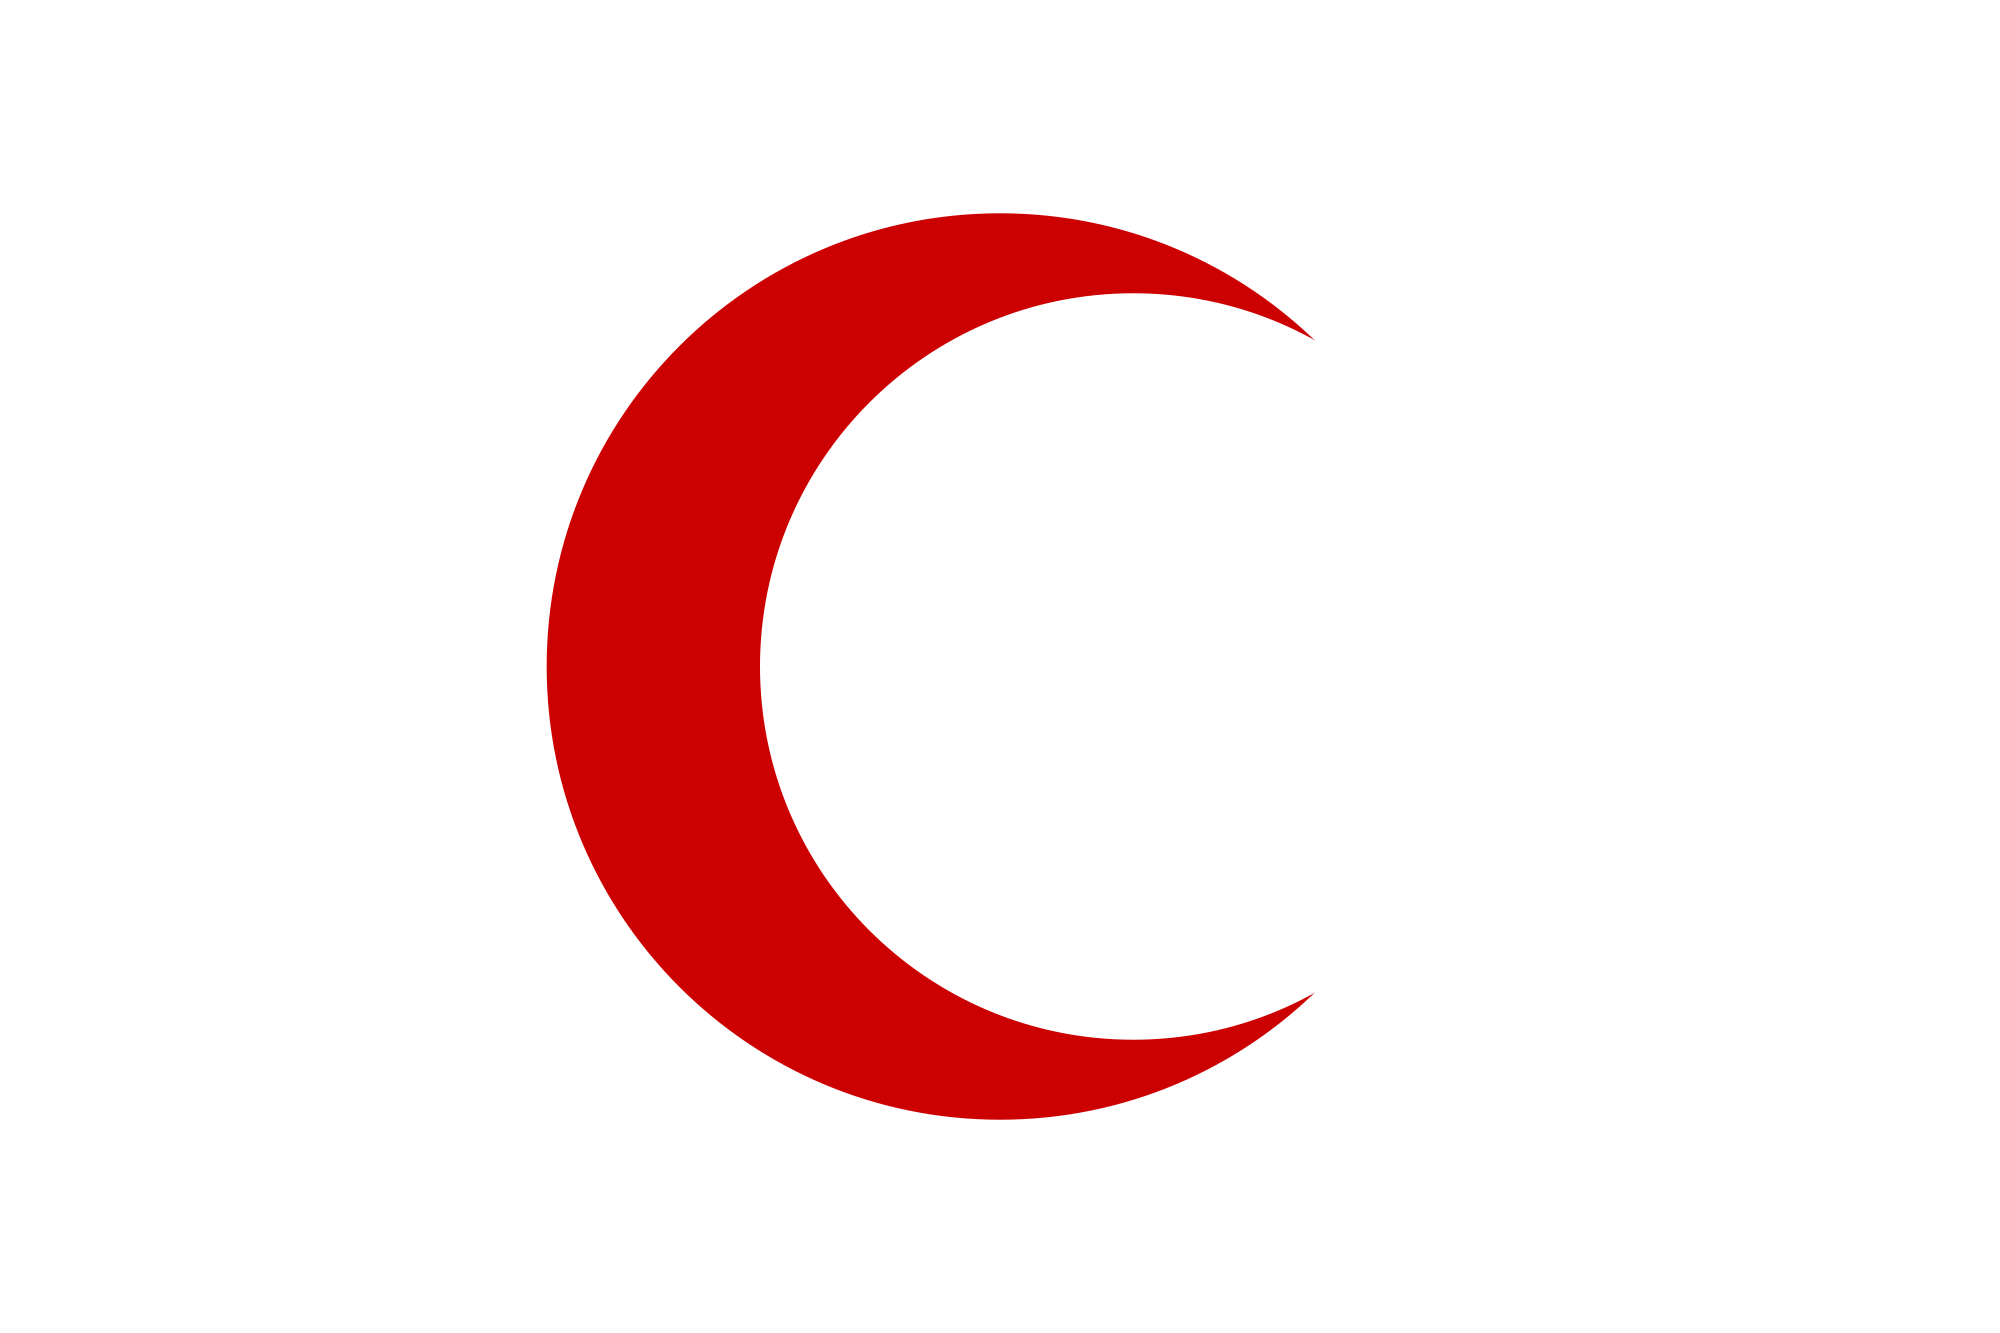 Red Crescent Moon Logo - Emblems of the International Red Cross and Red Crescent Movement ...